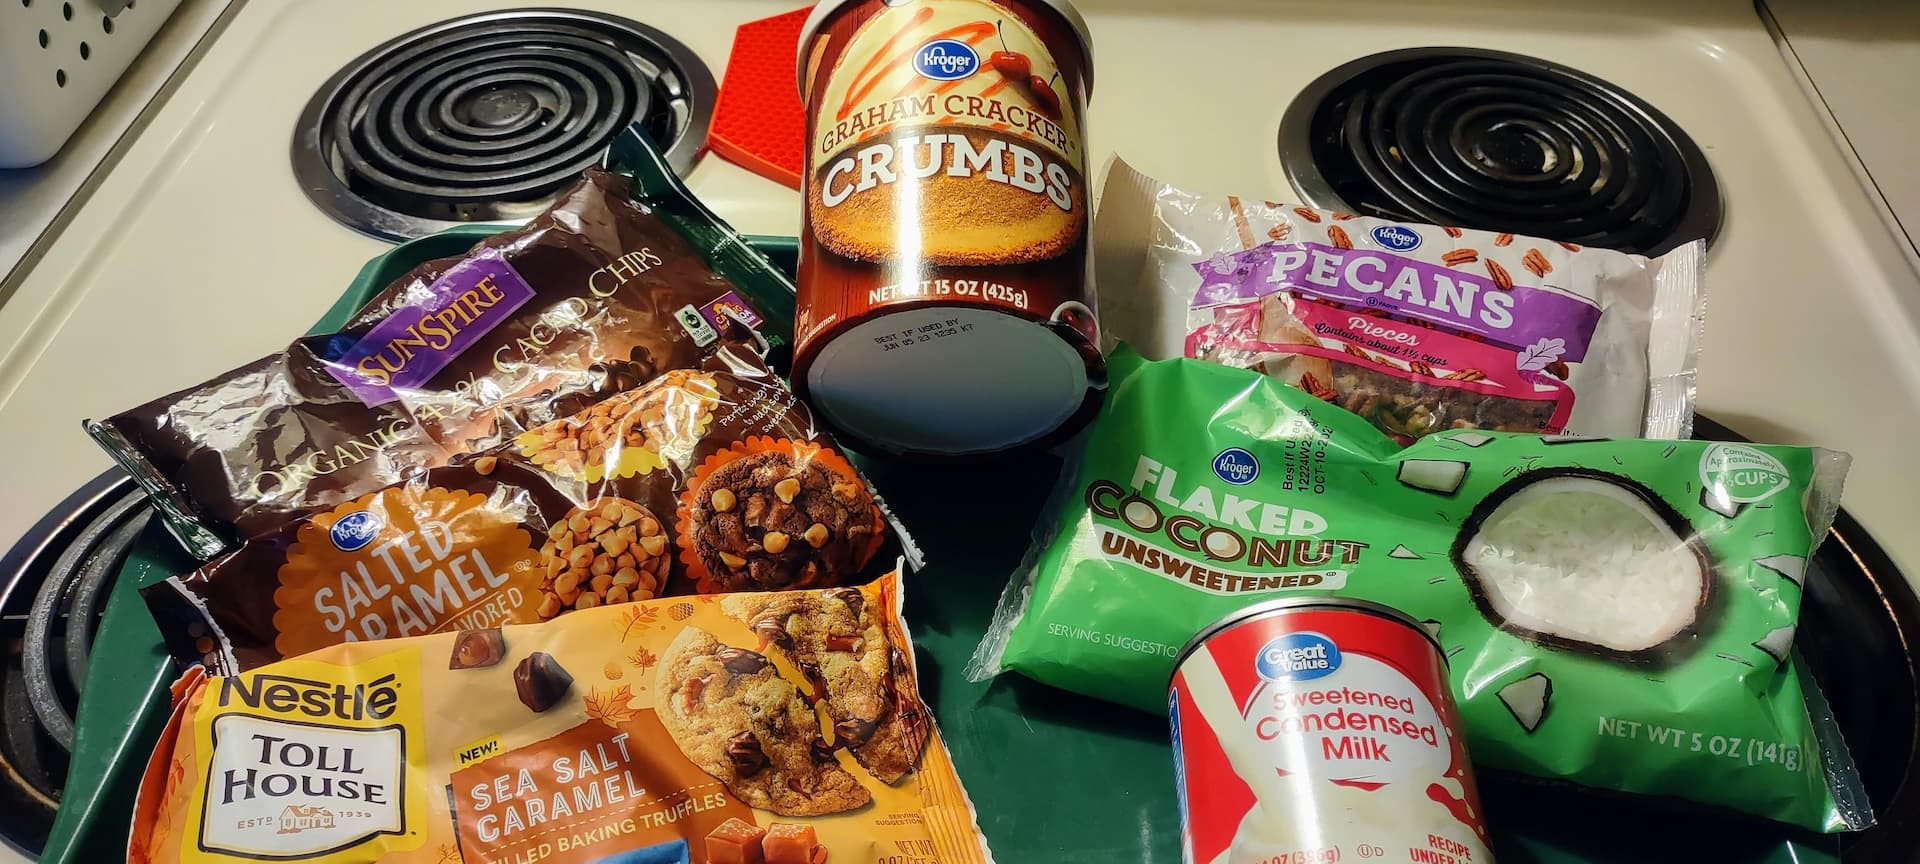 Seven-or-eight-layer cookie bar ingredients laying on a range: canister of graham cracker crumbs, bag of pecans, flaked/shaved coconut, can of sweetened condensed milk and bags of various flavors of chocolate baking chips.